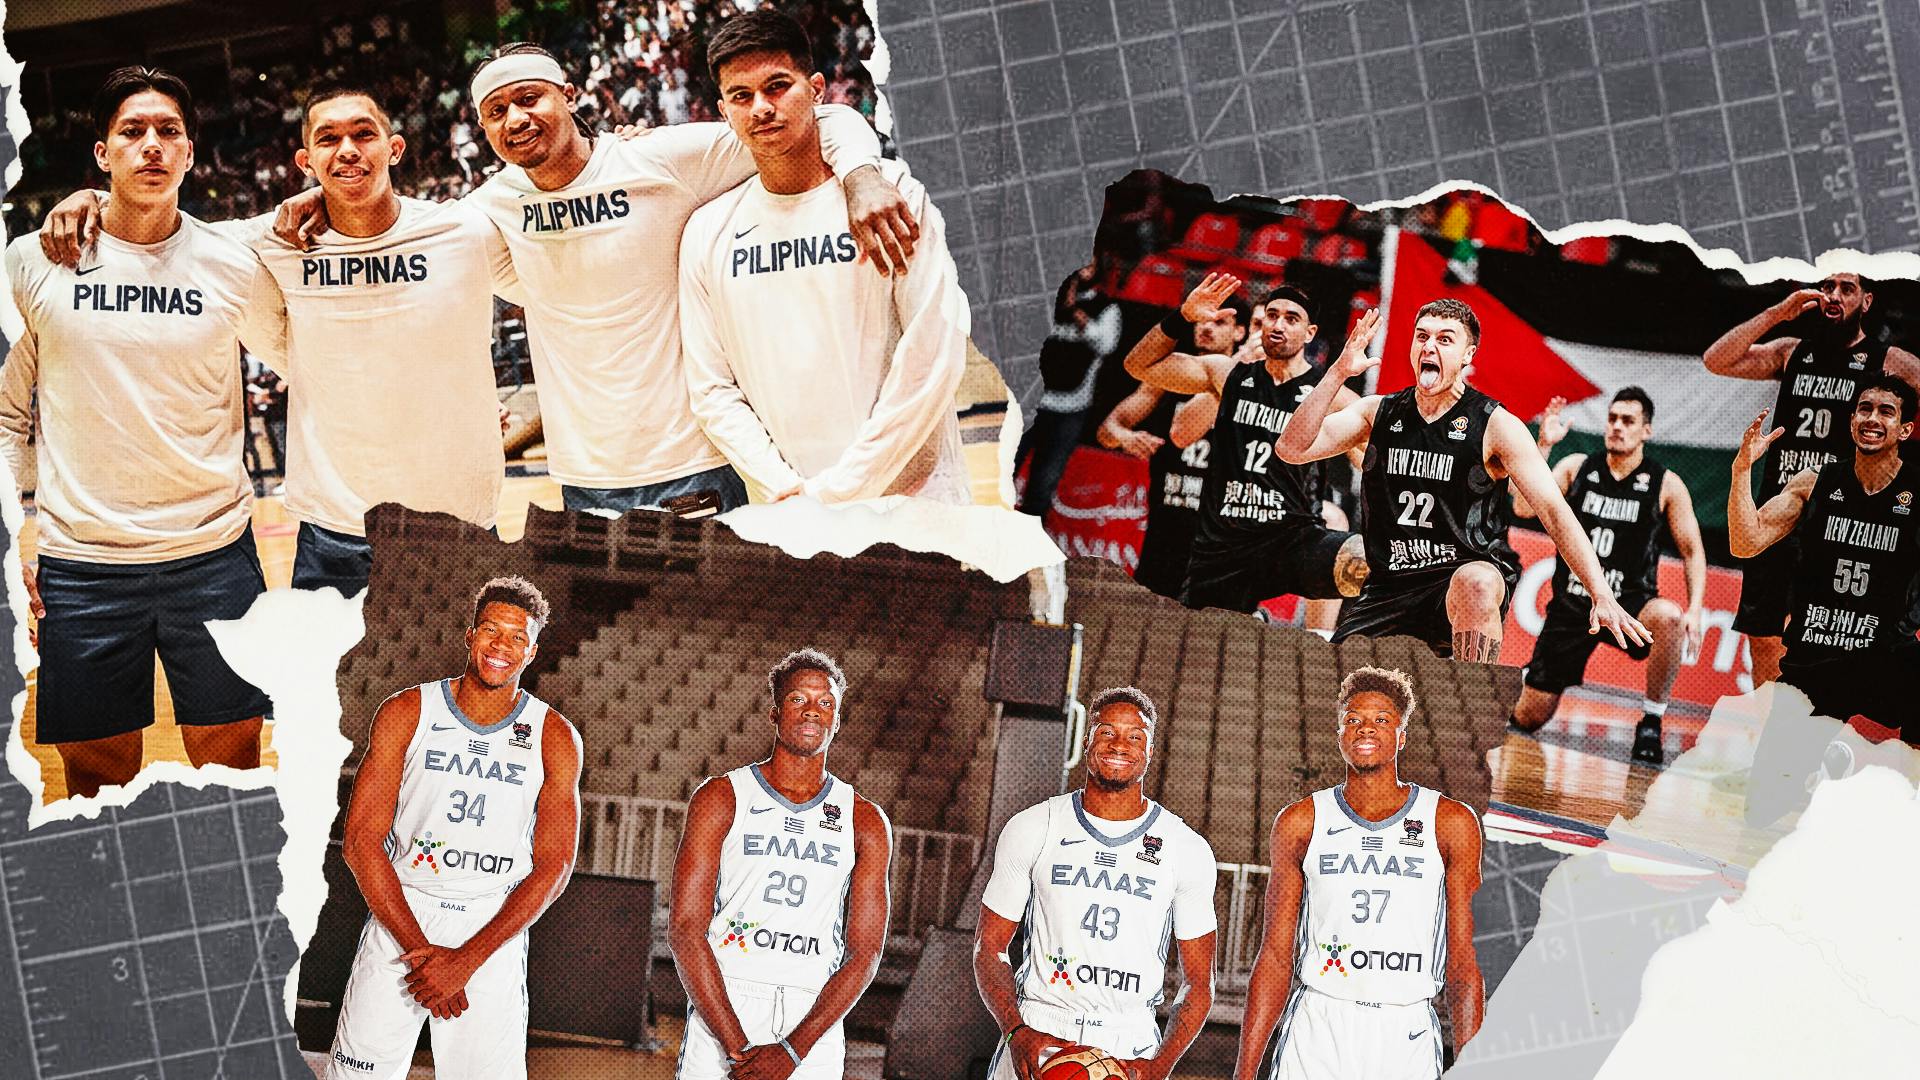 Haka, bro connections, and more: Things to watch out for in FIBA World Cup